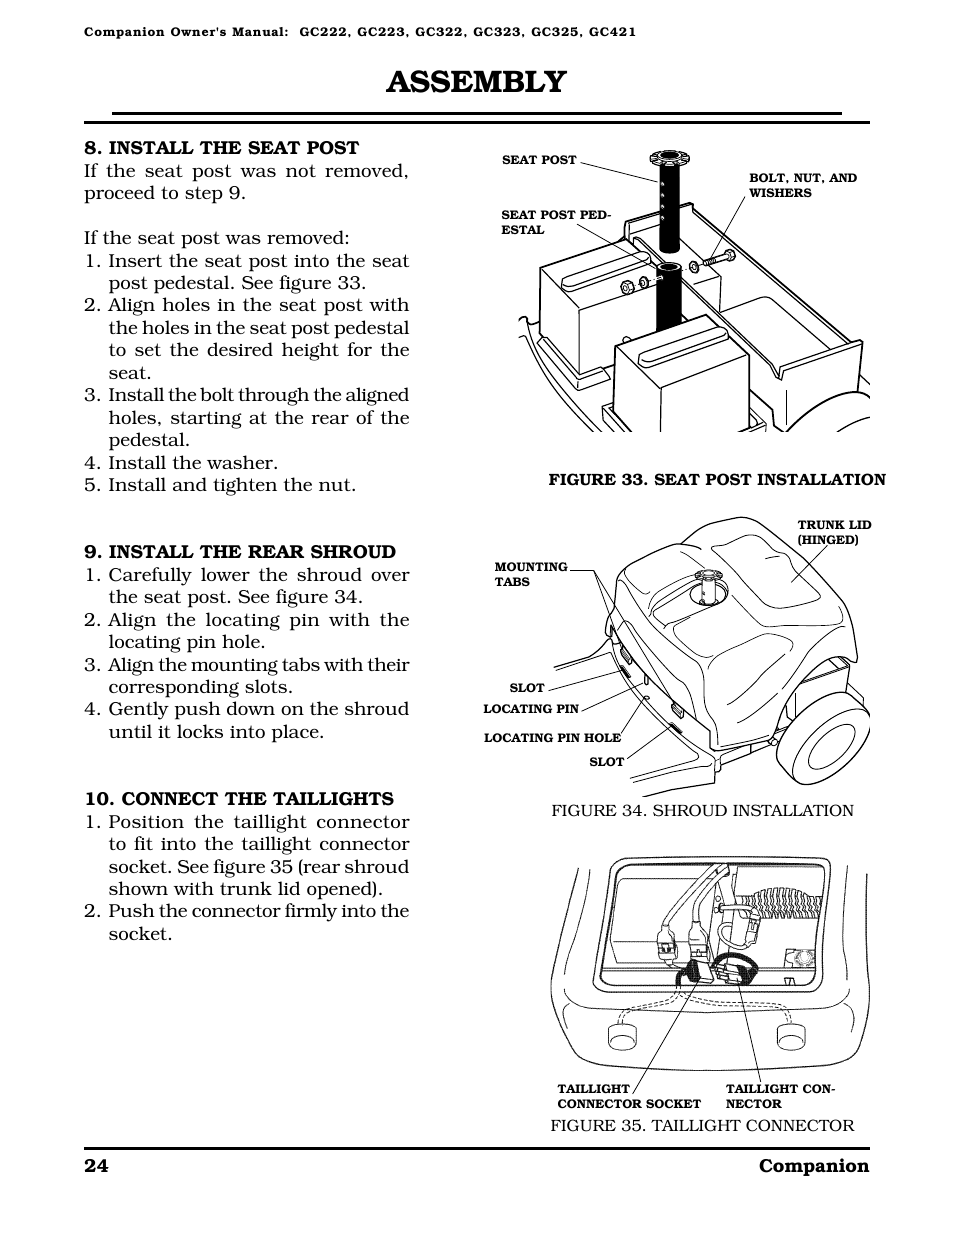 Assembly | Golden Technologies Companion II User Manual | Page 26 / 41